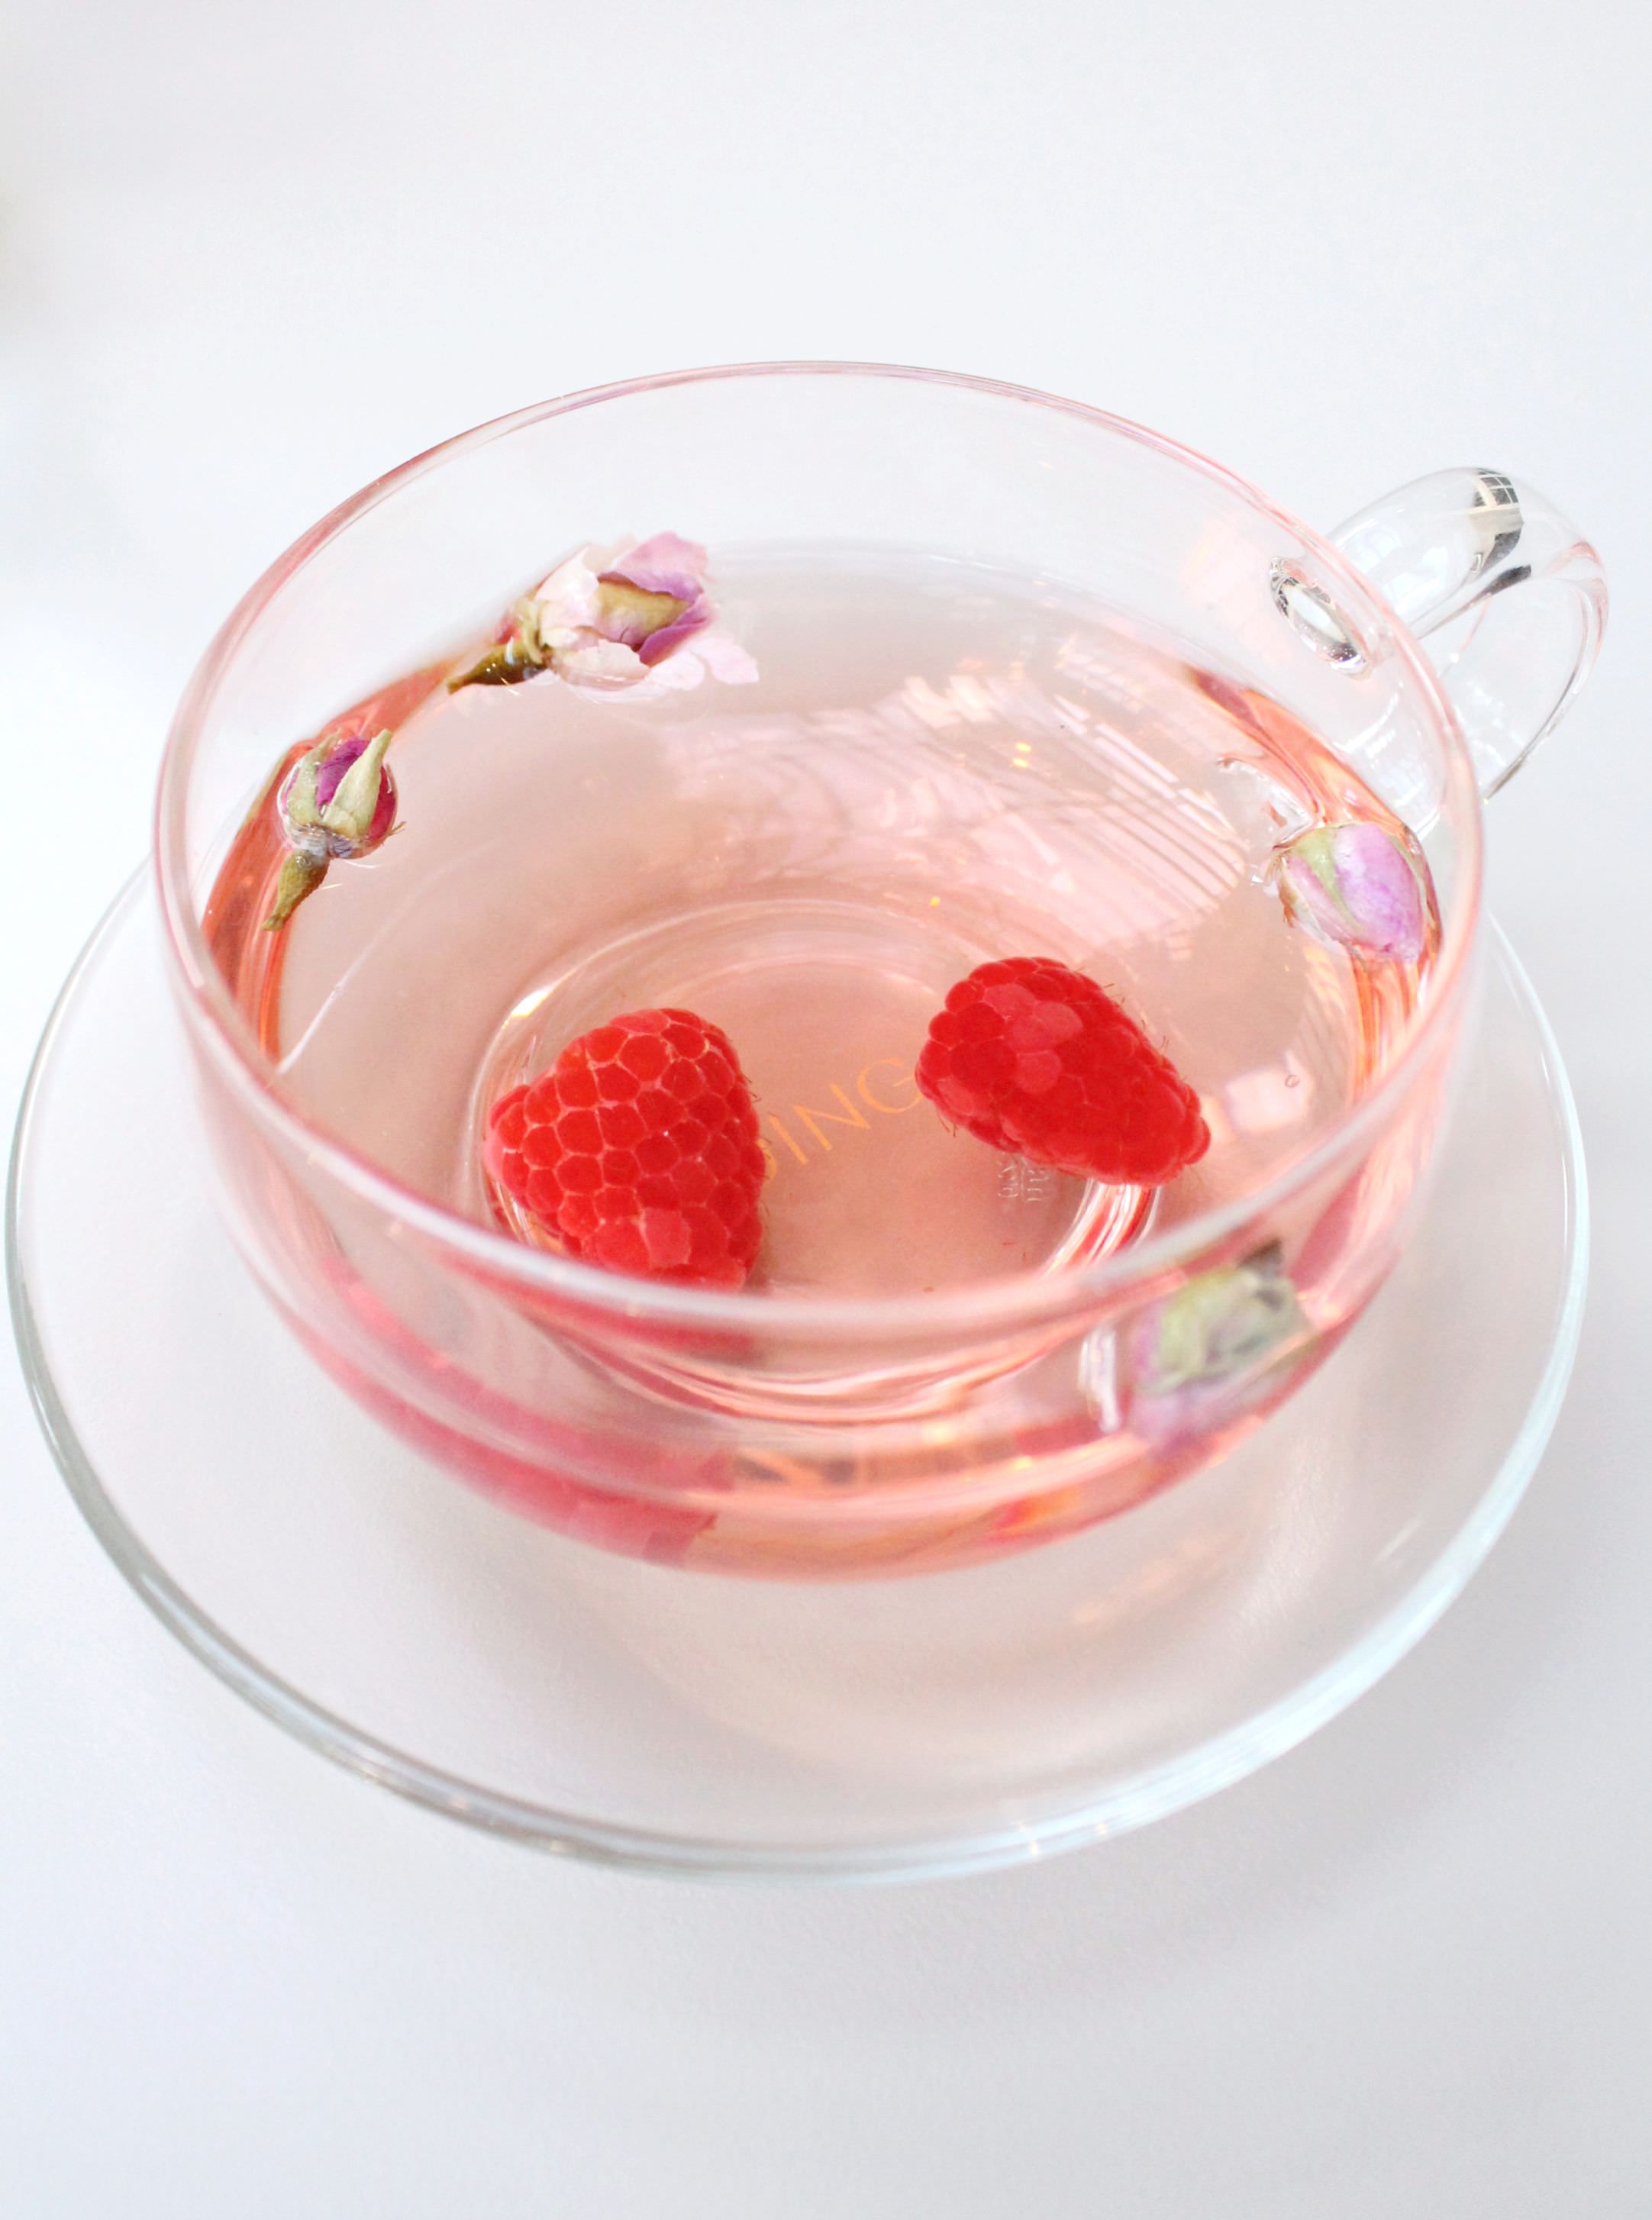 sipsmiths-gin-rosebud-and-raspberries-photo-by-Little-big-Bell